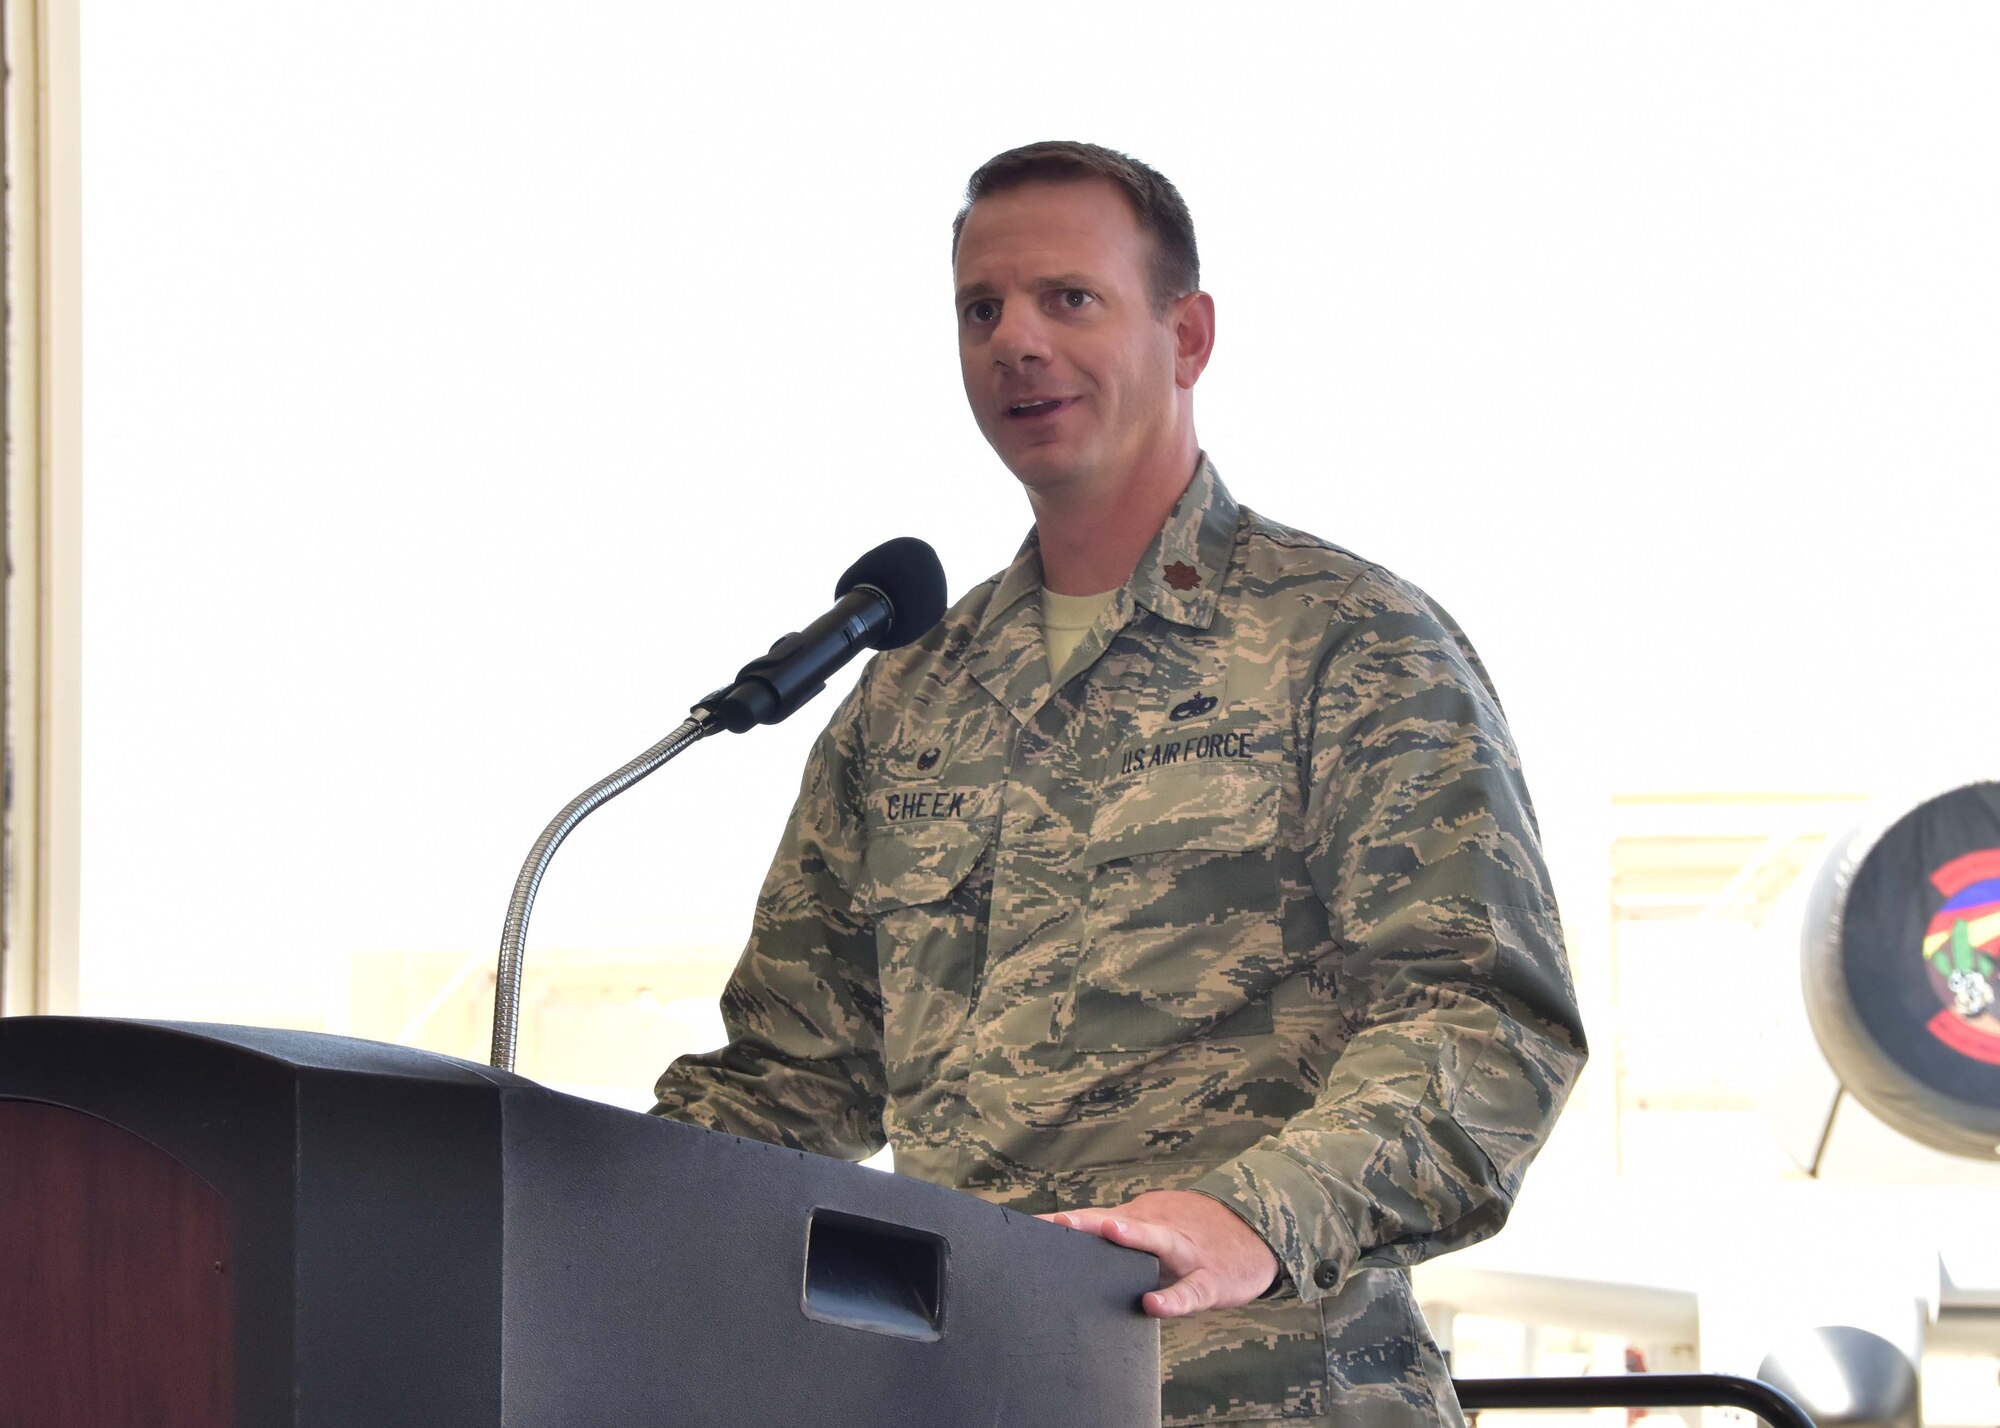 Maj. Bobby Cheek, 924th Maintenance Squadron commander, gives a speech July 9 after taking command during a change of command ceremony at Davis-Monthan Air Force Base, Ariz. (U.S. Air Force Photo by Tech. Sgt. Louis Vega Jr.)